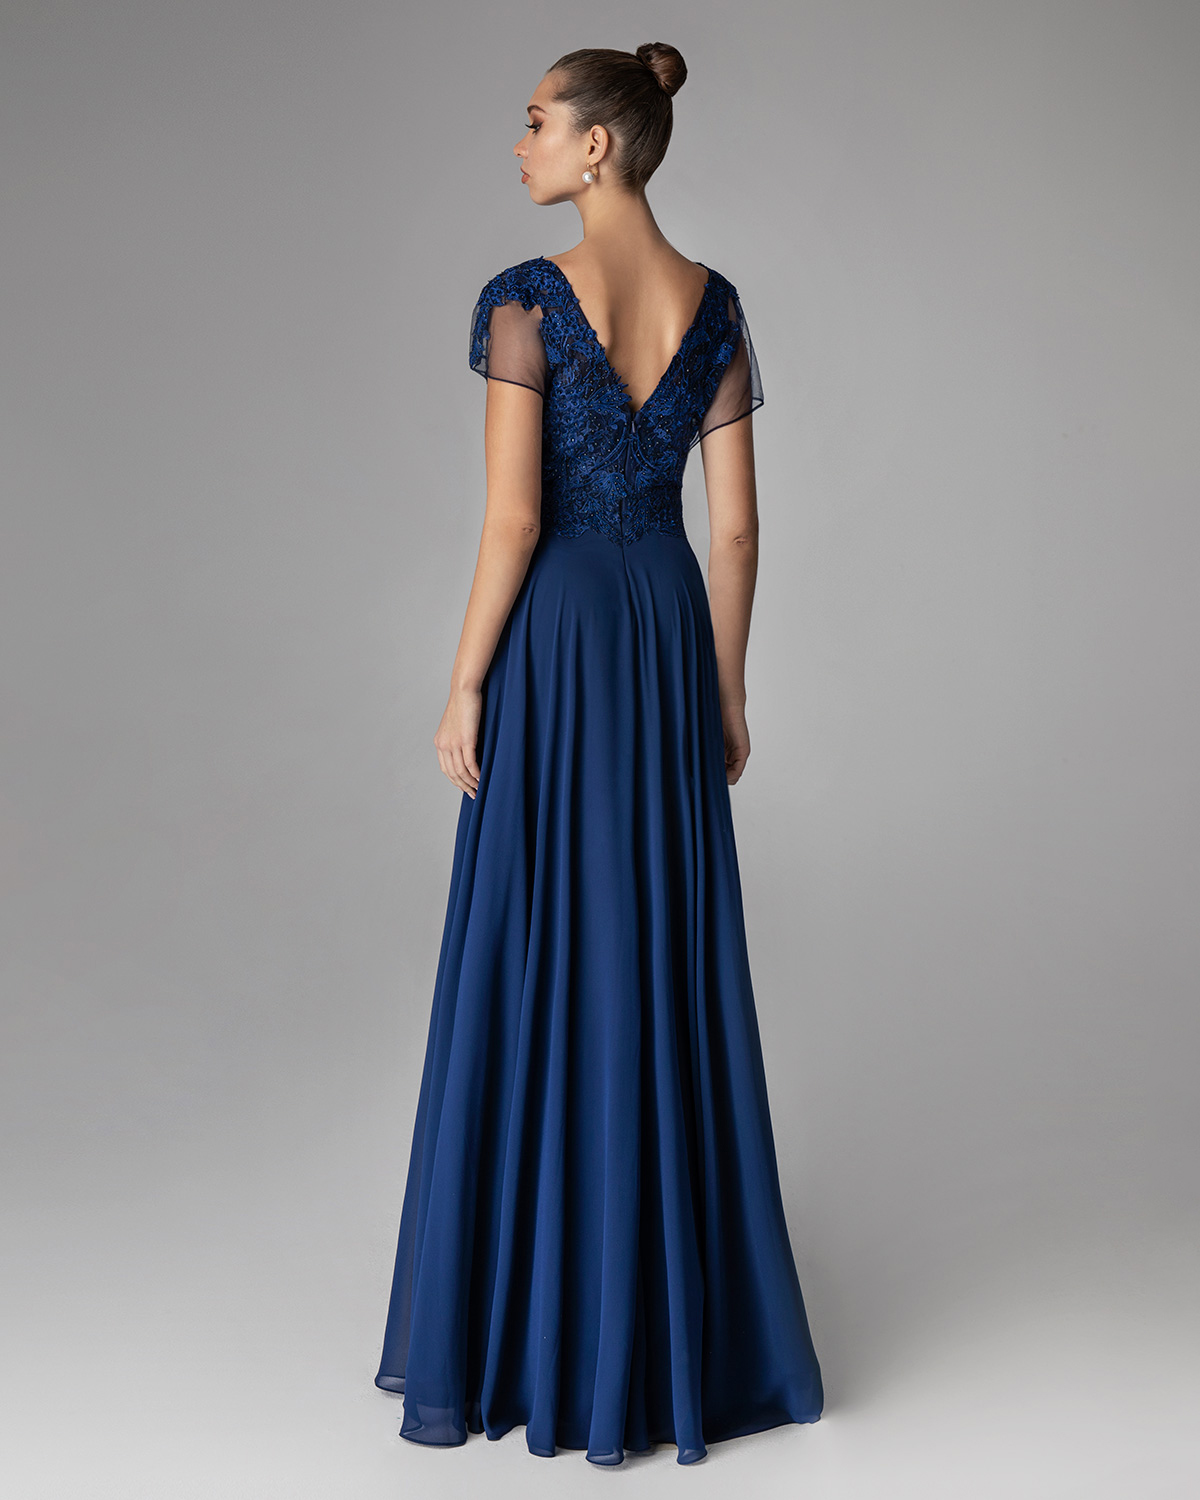 Long evening dress with applique lace on the top and  short sleeves